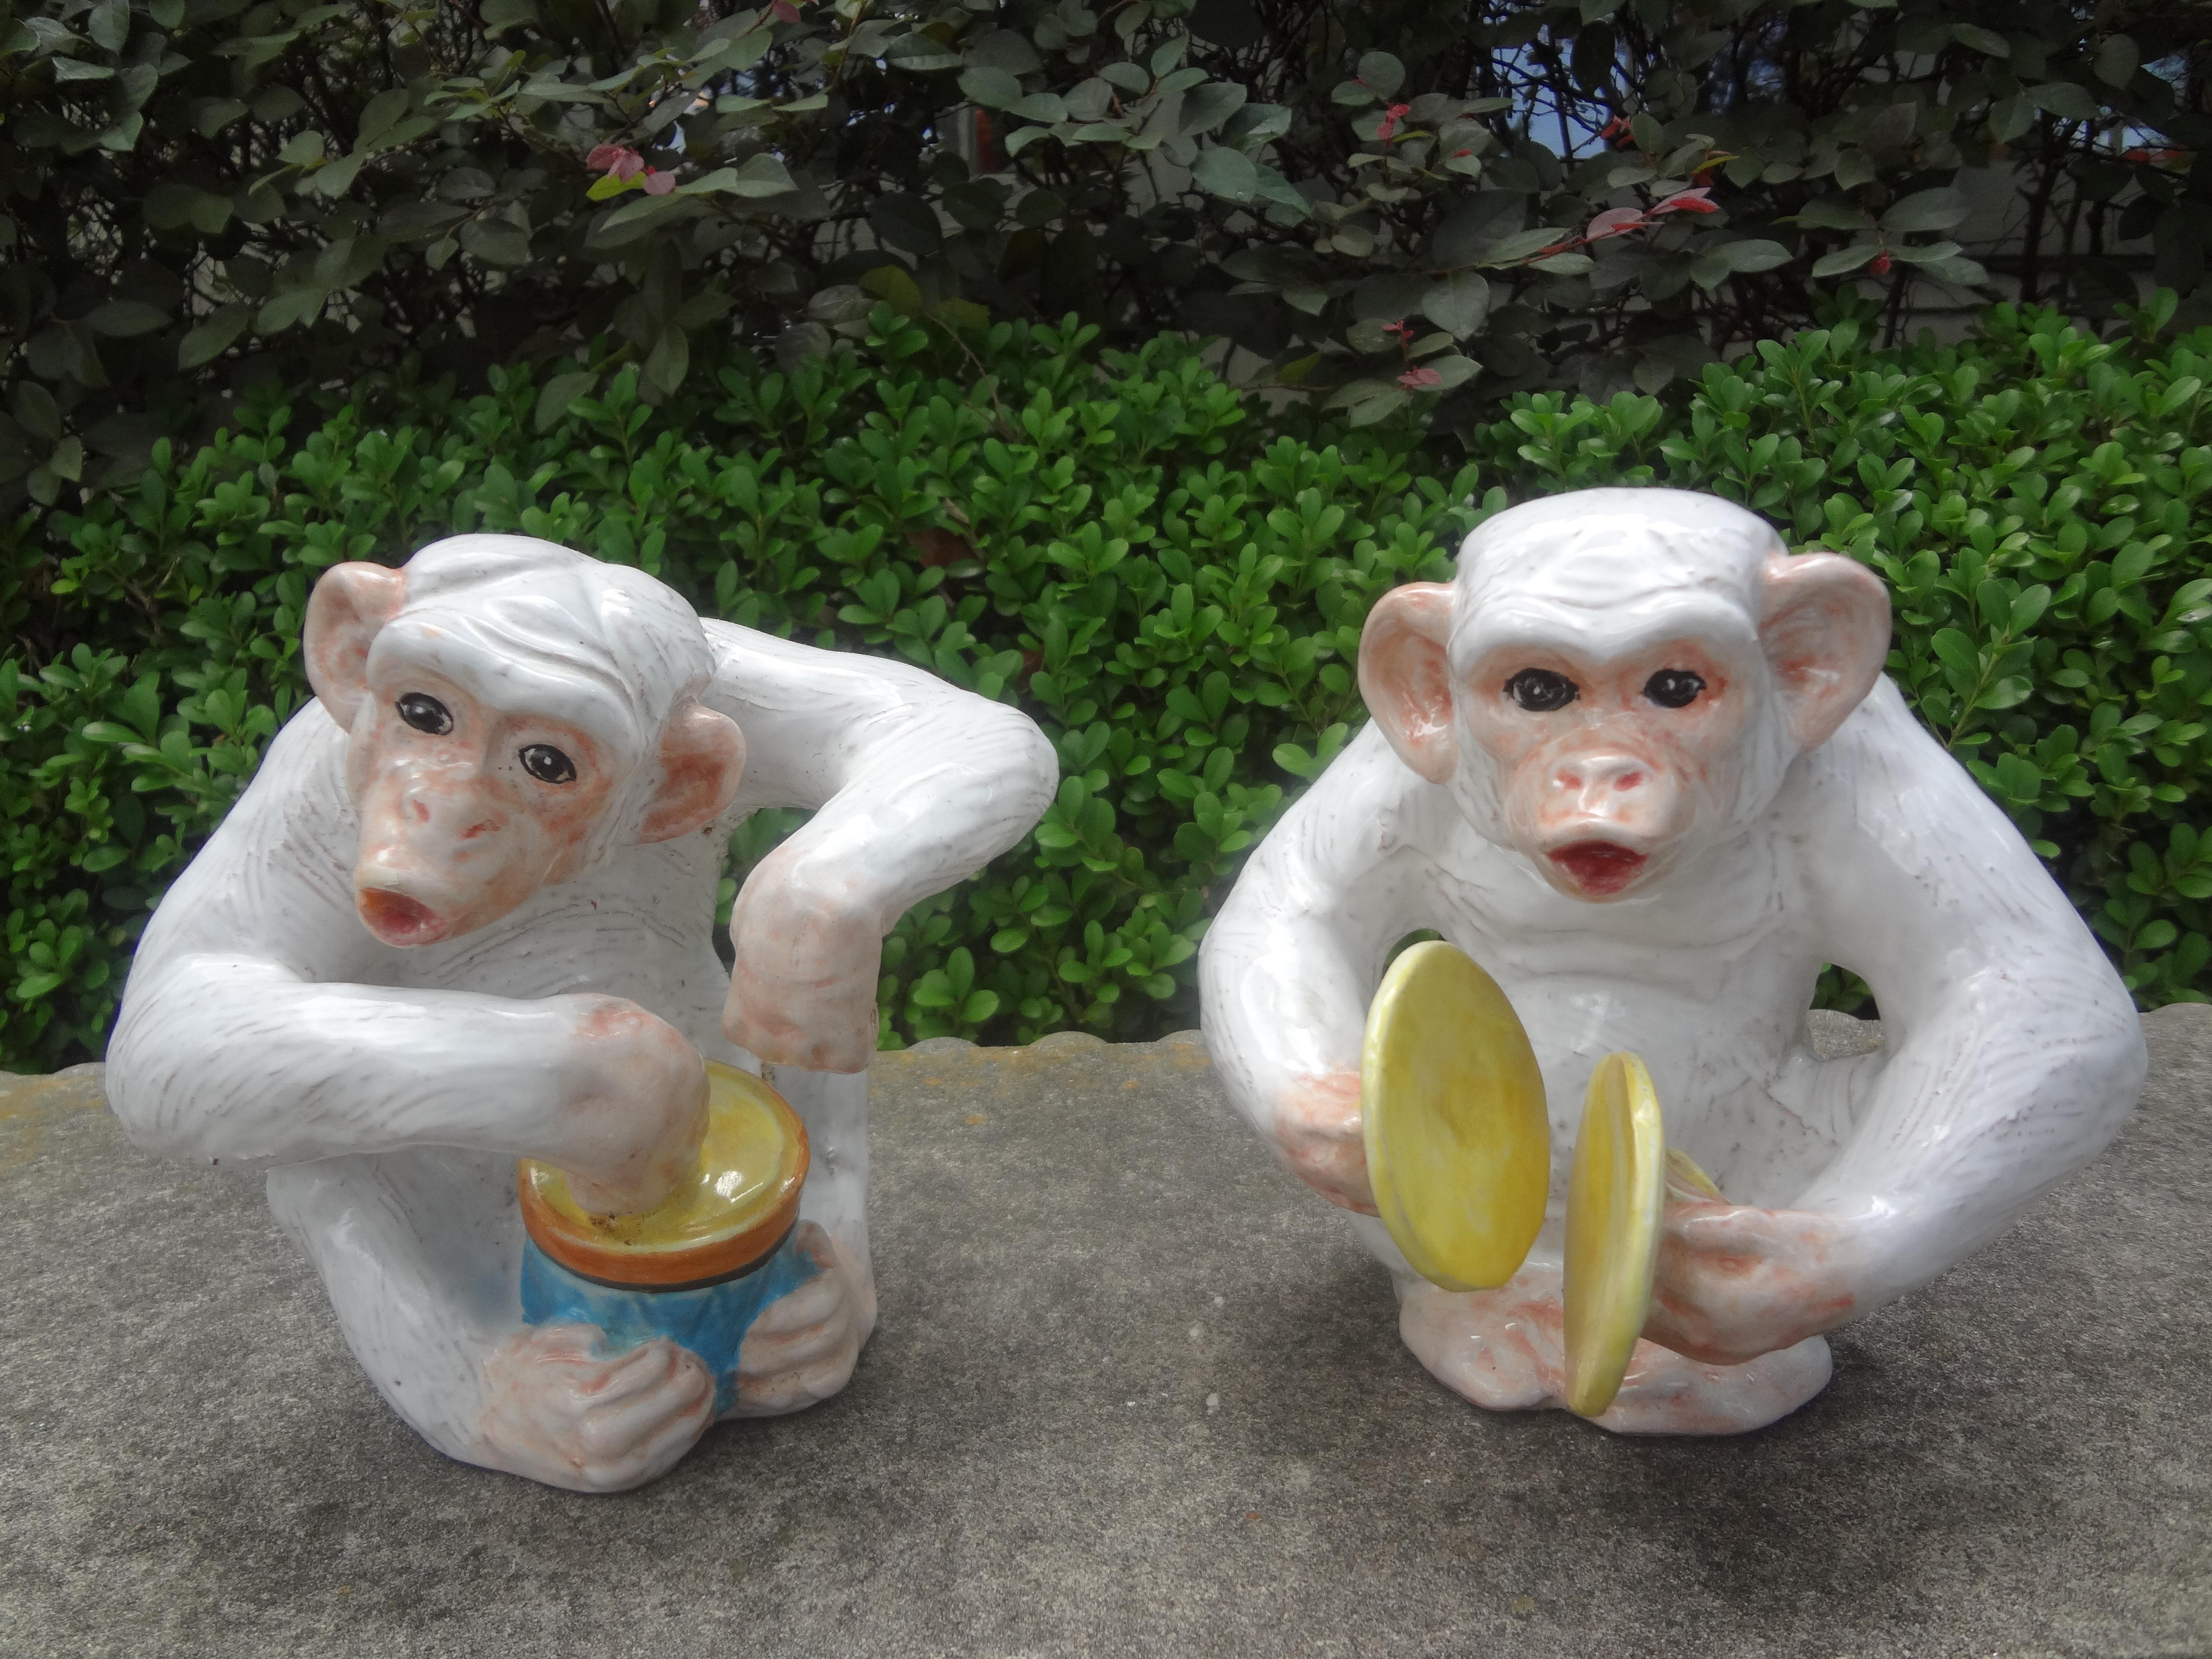 Whimsical pair of mid-century Italian glazed terra-cotta monkey figures or statues. These Hollywood Regency vintage monkey sculptures are playing musical instruments. One monkey is playing a drum, the other monkey cymbals.